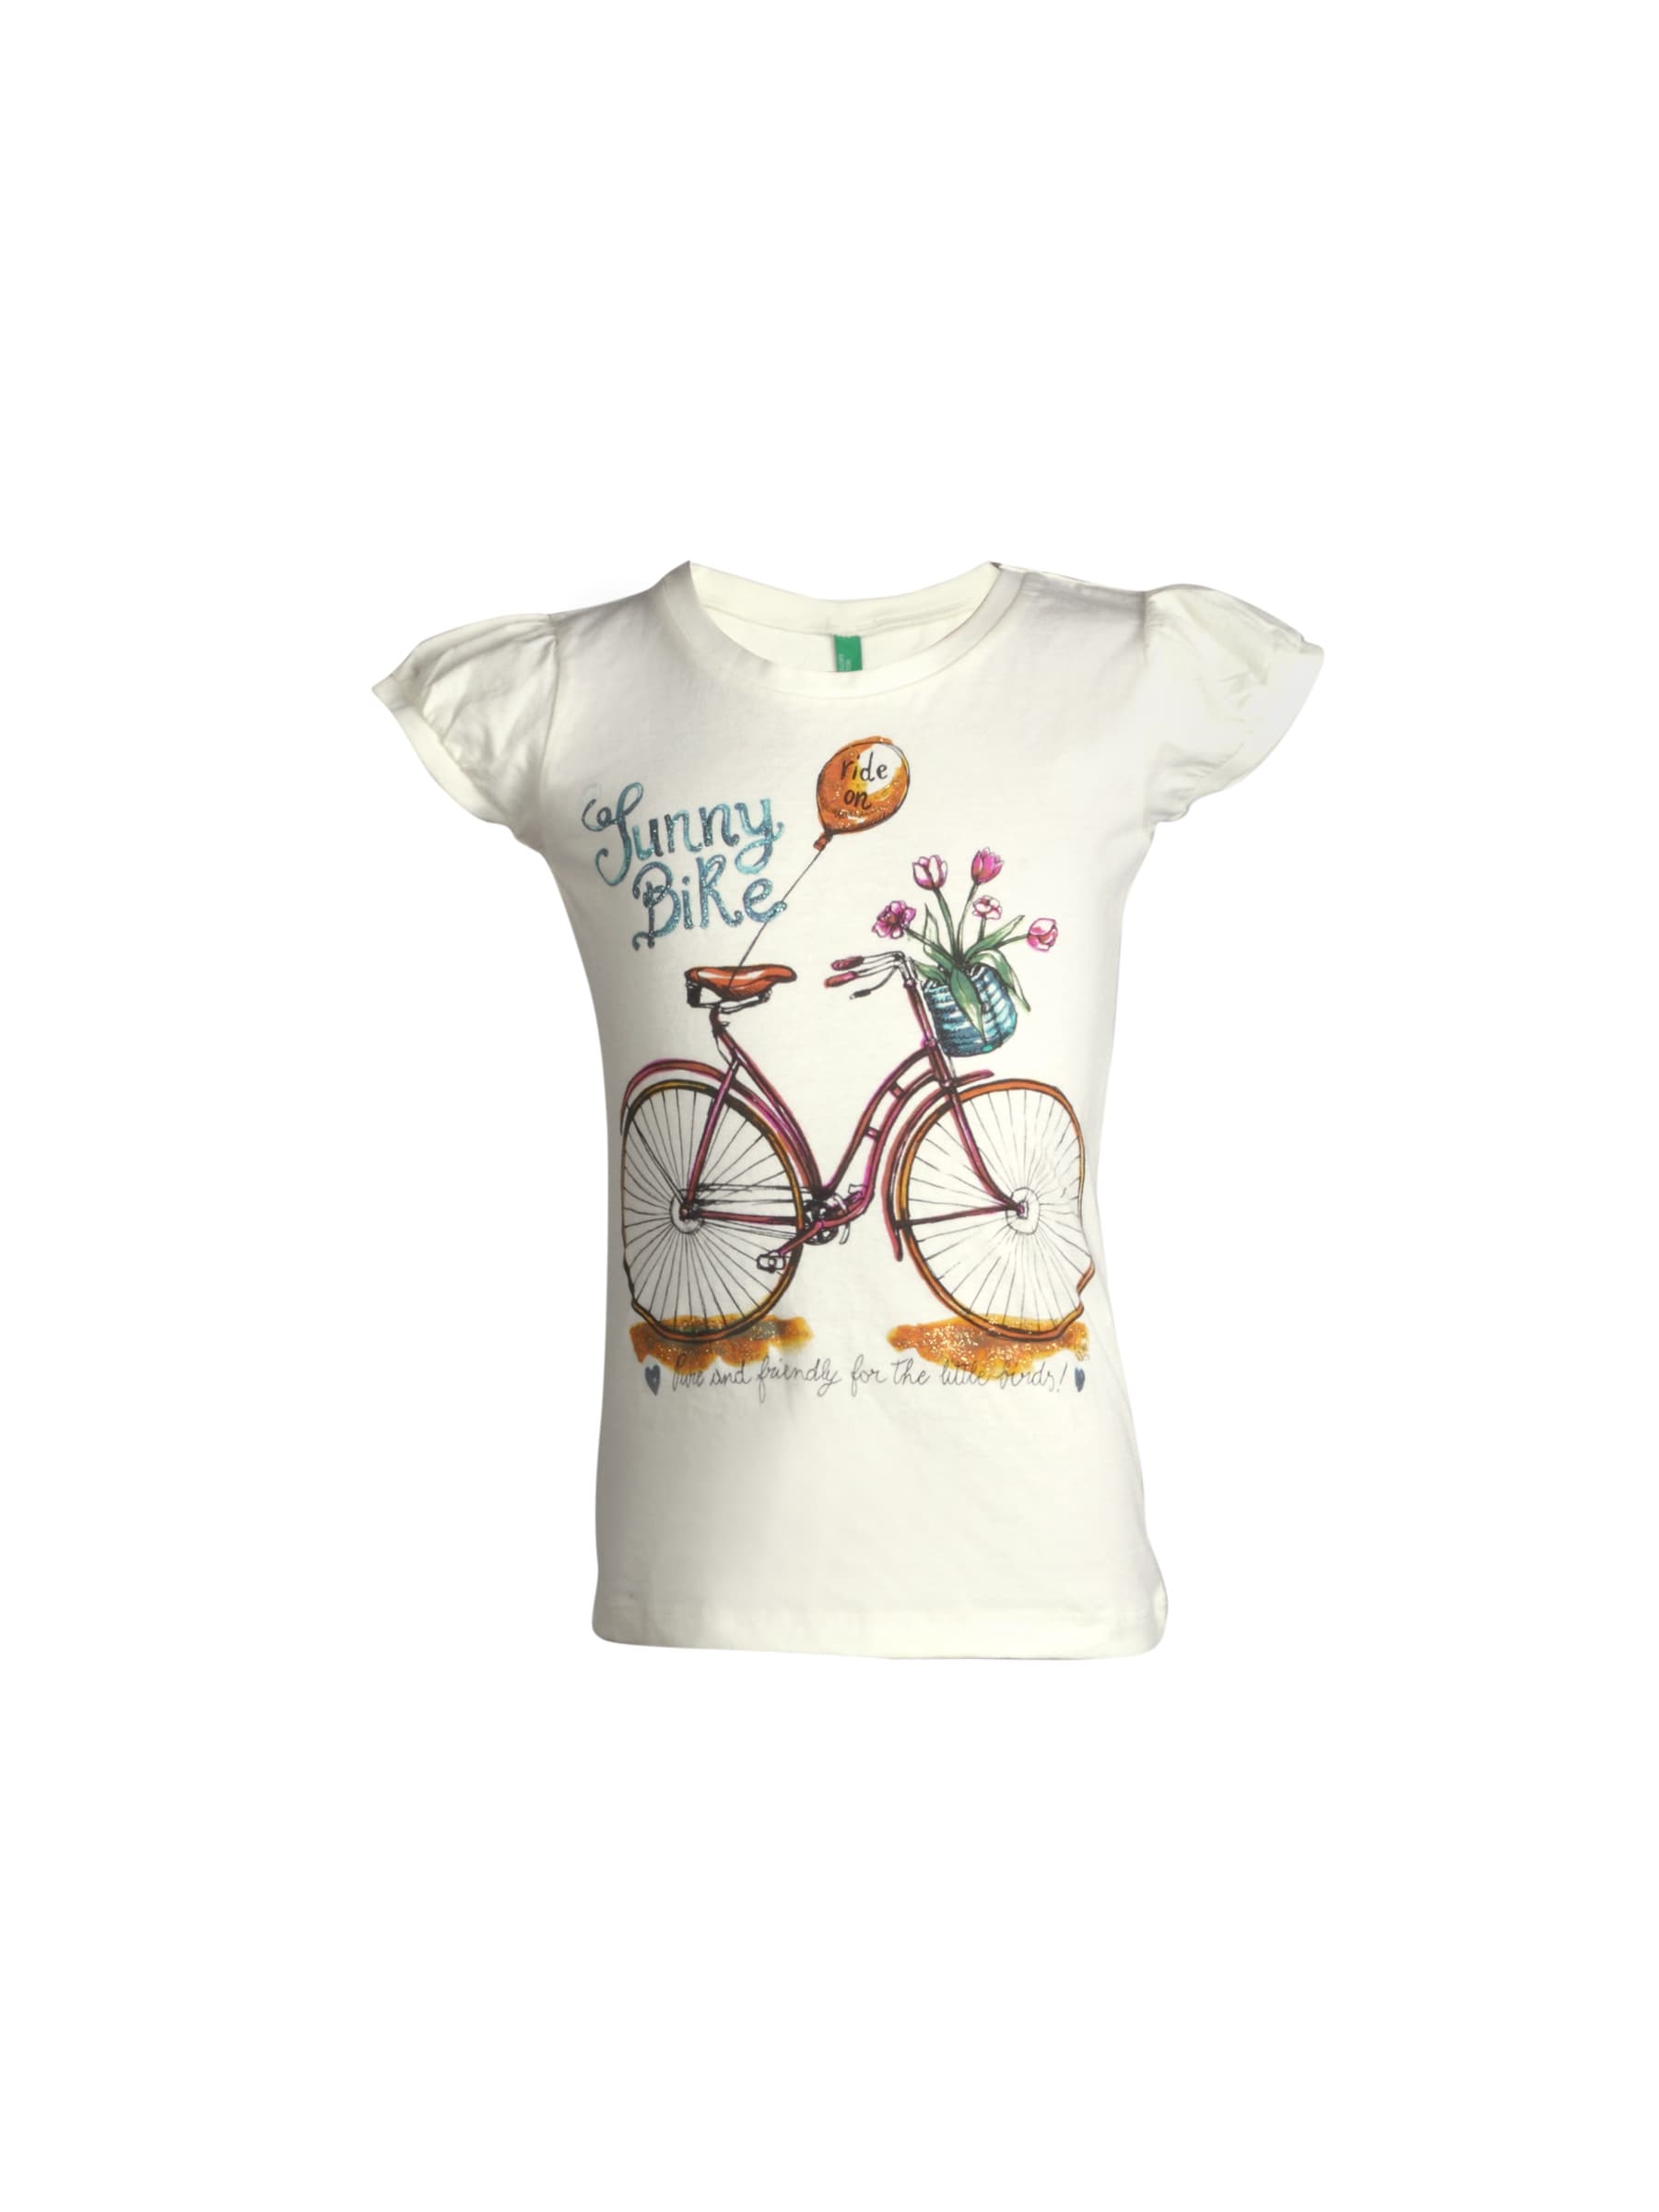 United Colors of Benetton Girls Printed Off White Top